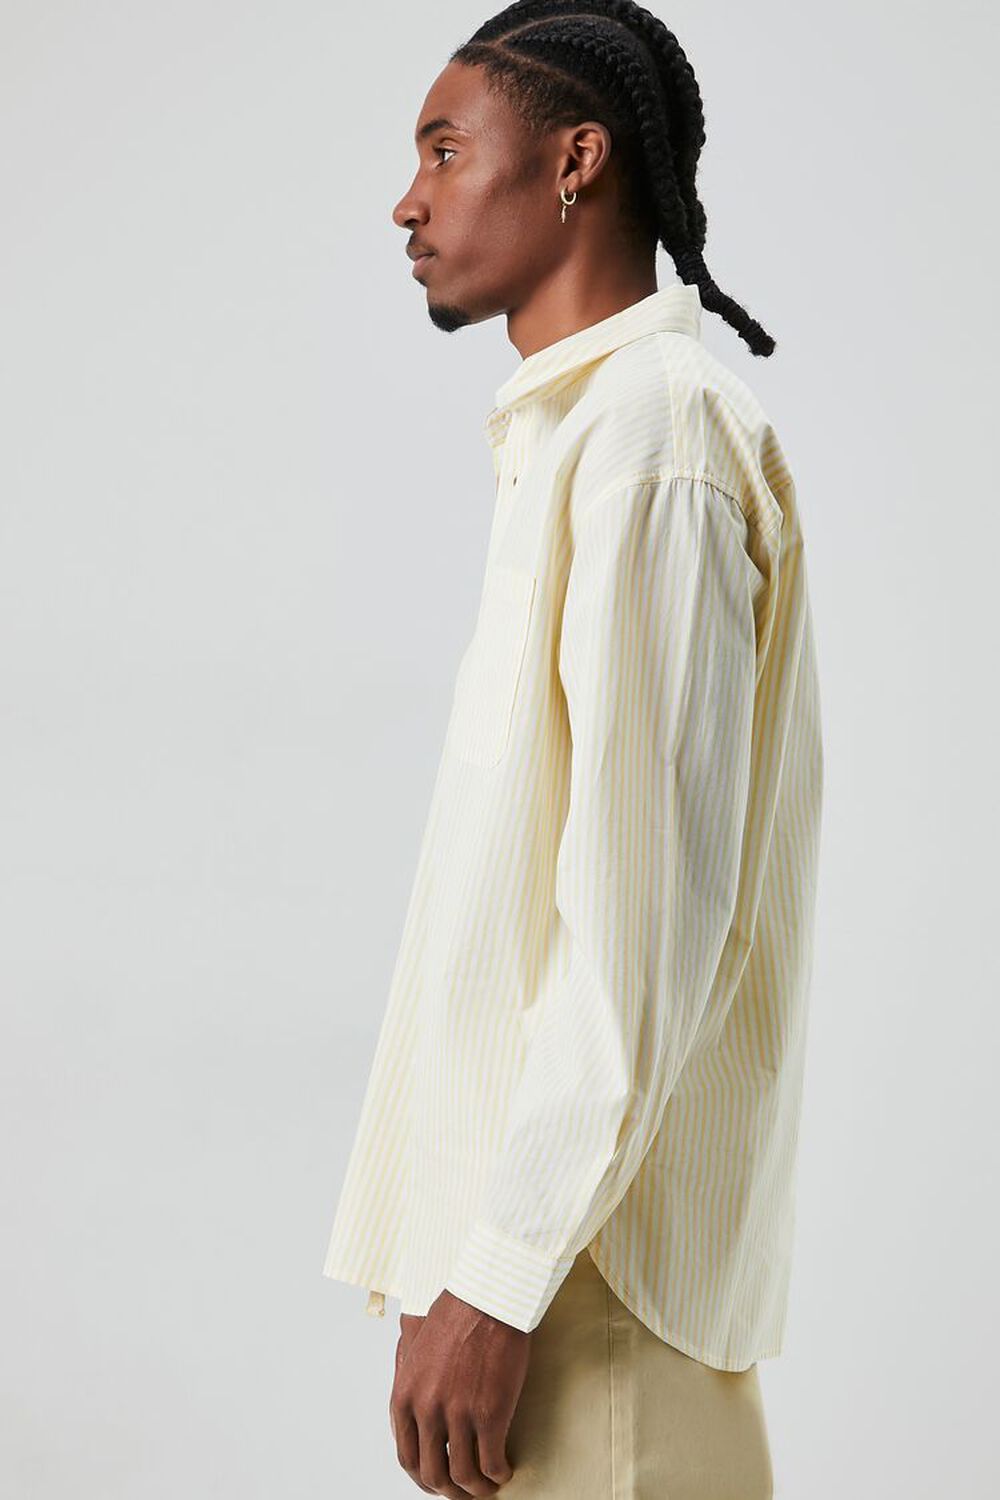 YELLOW/WHITE Striped Button-Front Shirt, image 2